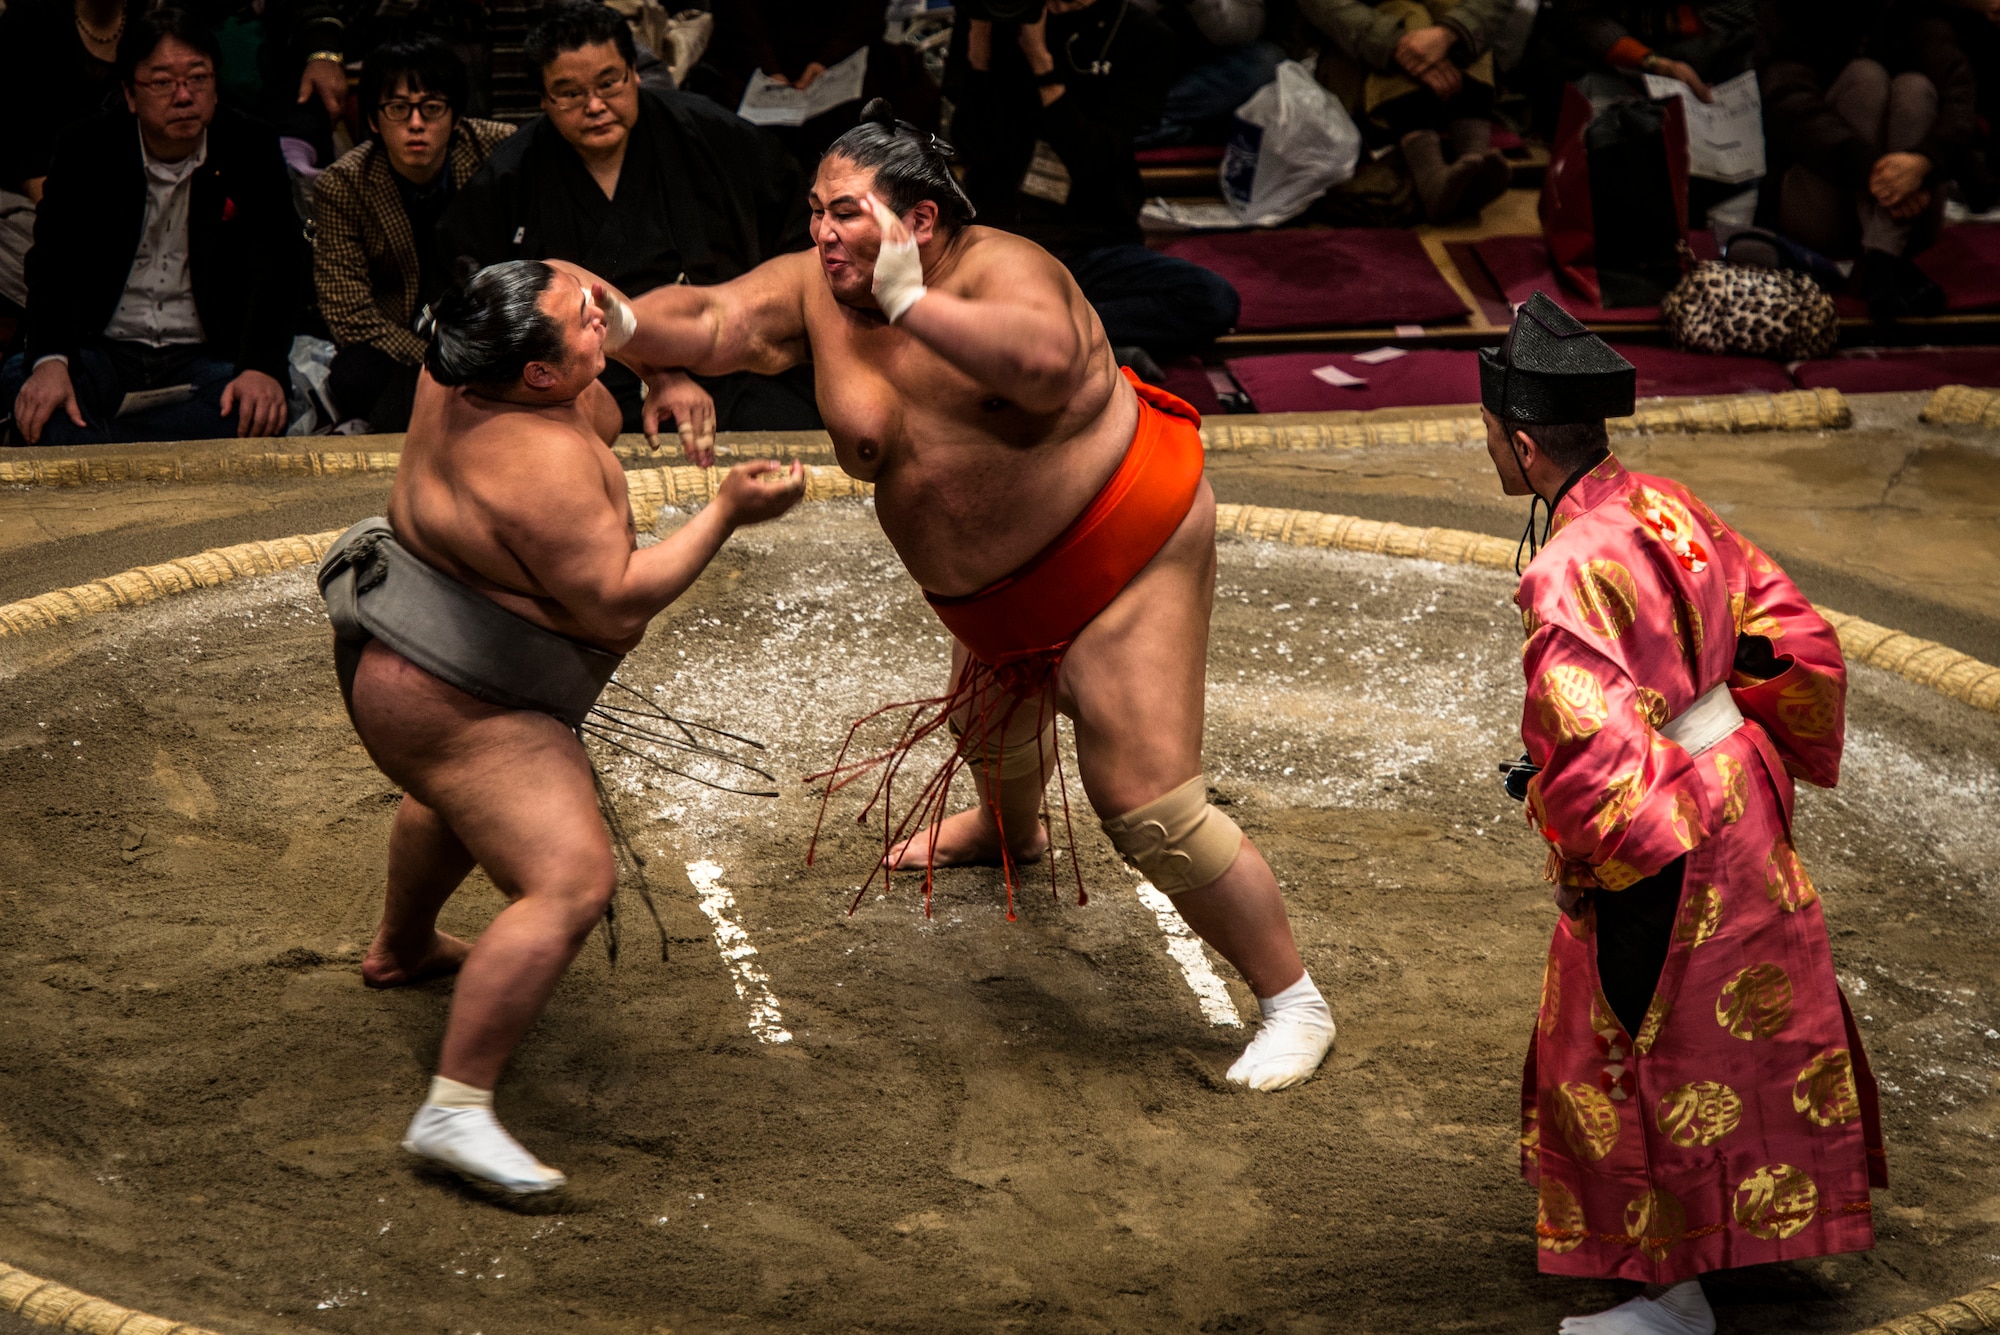 YOKOTA AIR BASE,Japan -- A Sumo wrestler strikes his opponent during the Grand Sumo Tournament at the Ryogoku Kokugikan Sumo Hall in Tokyo, Feb. 10, 2013. Being stationed at Yokota Air Base offers Airmen the chance to engage with the Japanese community and enjoy Japanese culture. (U.S. Air Force photo by Capt. Raymond Geoffroy)